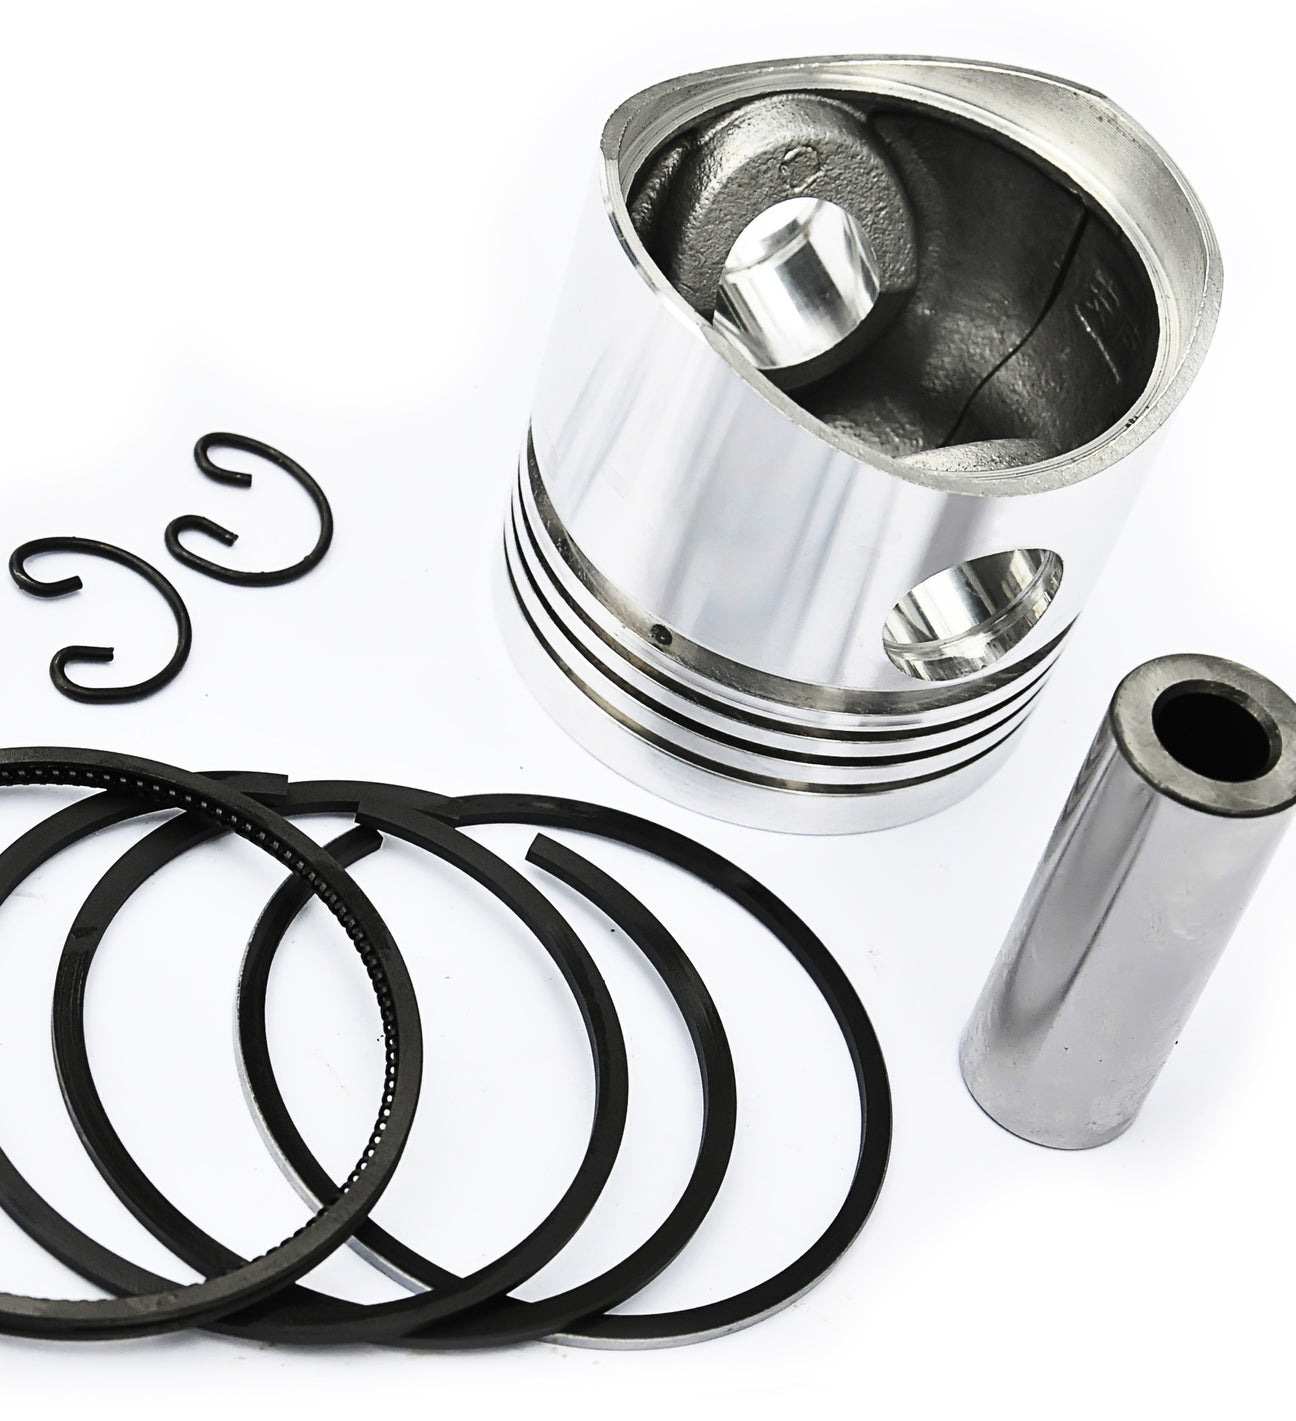 Heavy Equipment - Pistons, Rings, Rods & Components